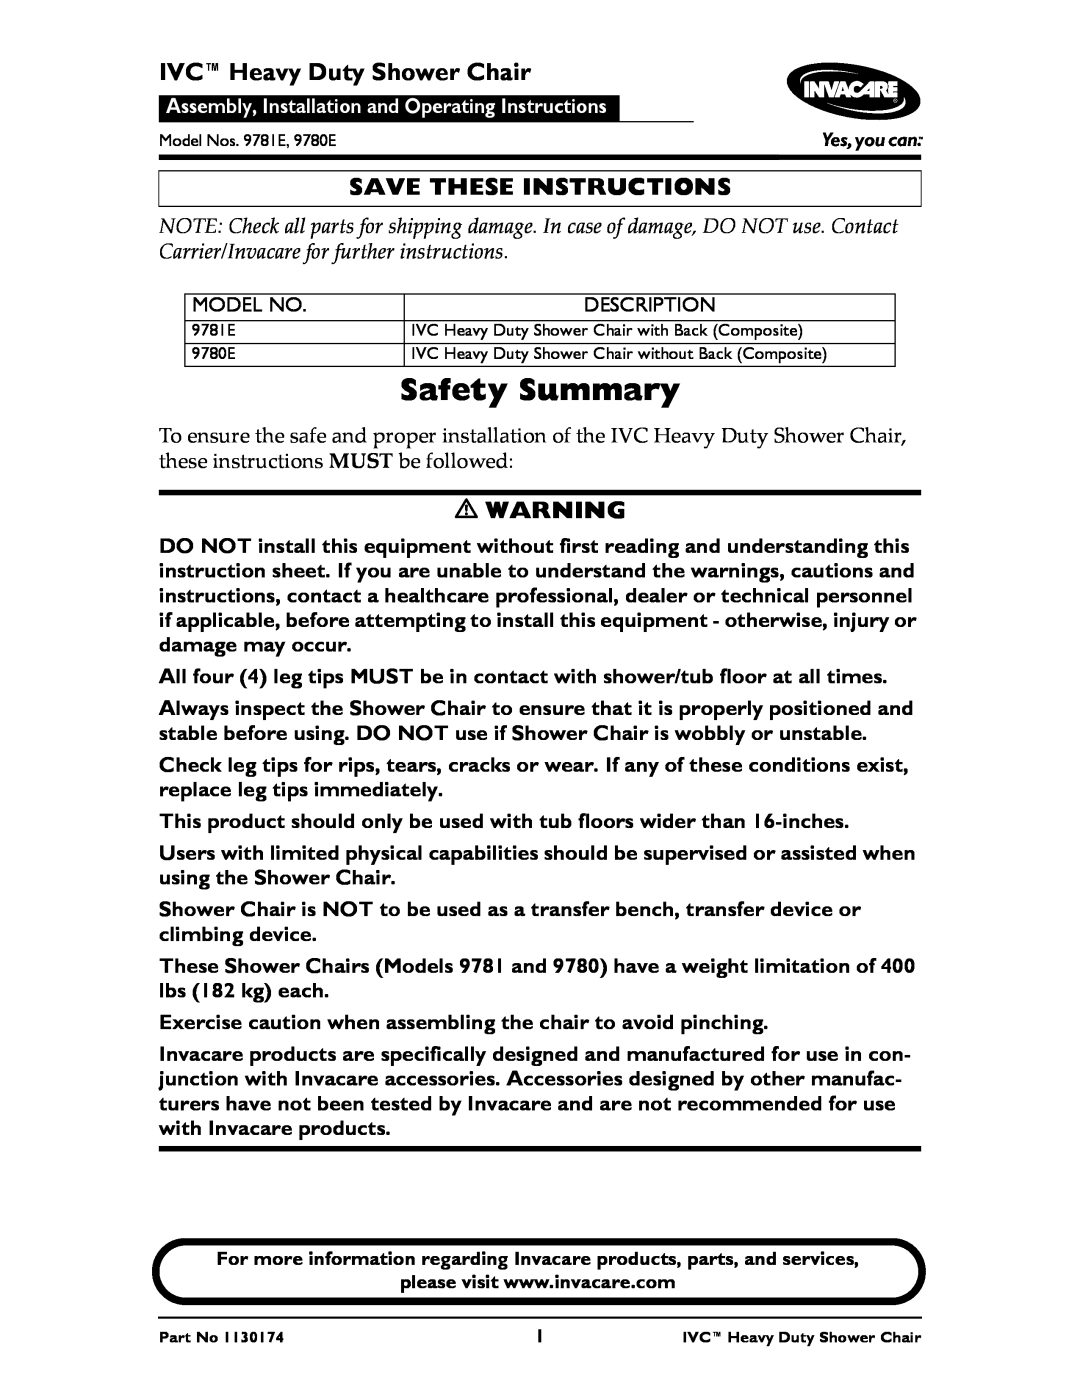 Invacare 9781E, 9780E instruction sheet Safety Summary, IVCHeavy Duty Shower Chair, Save These Instructions 